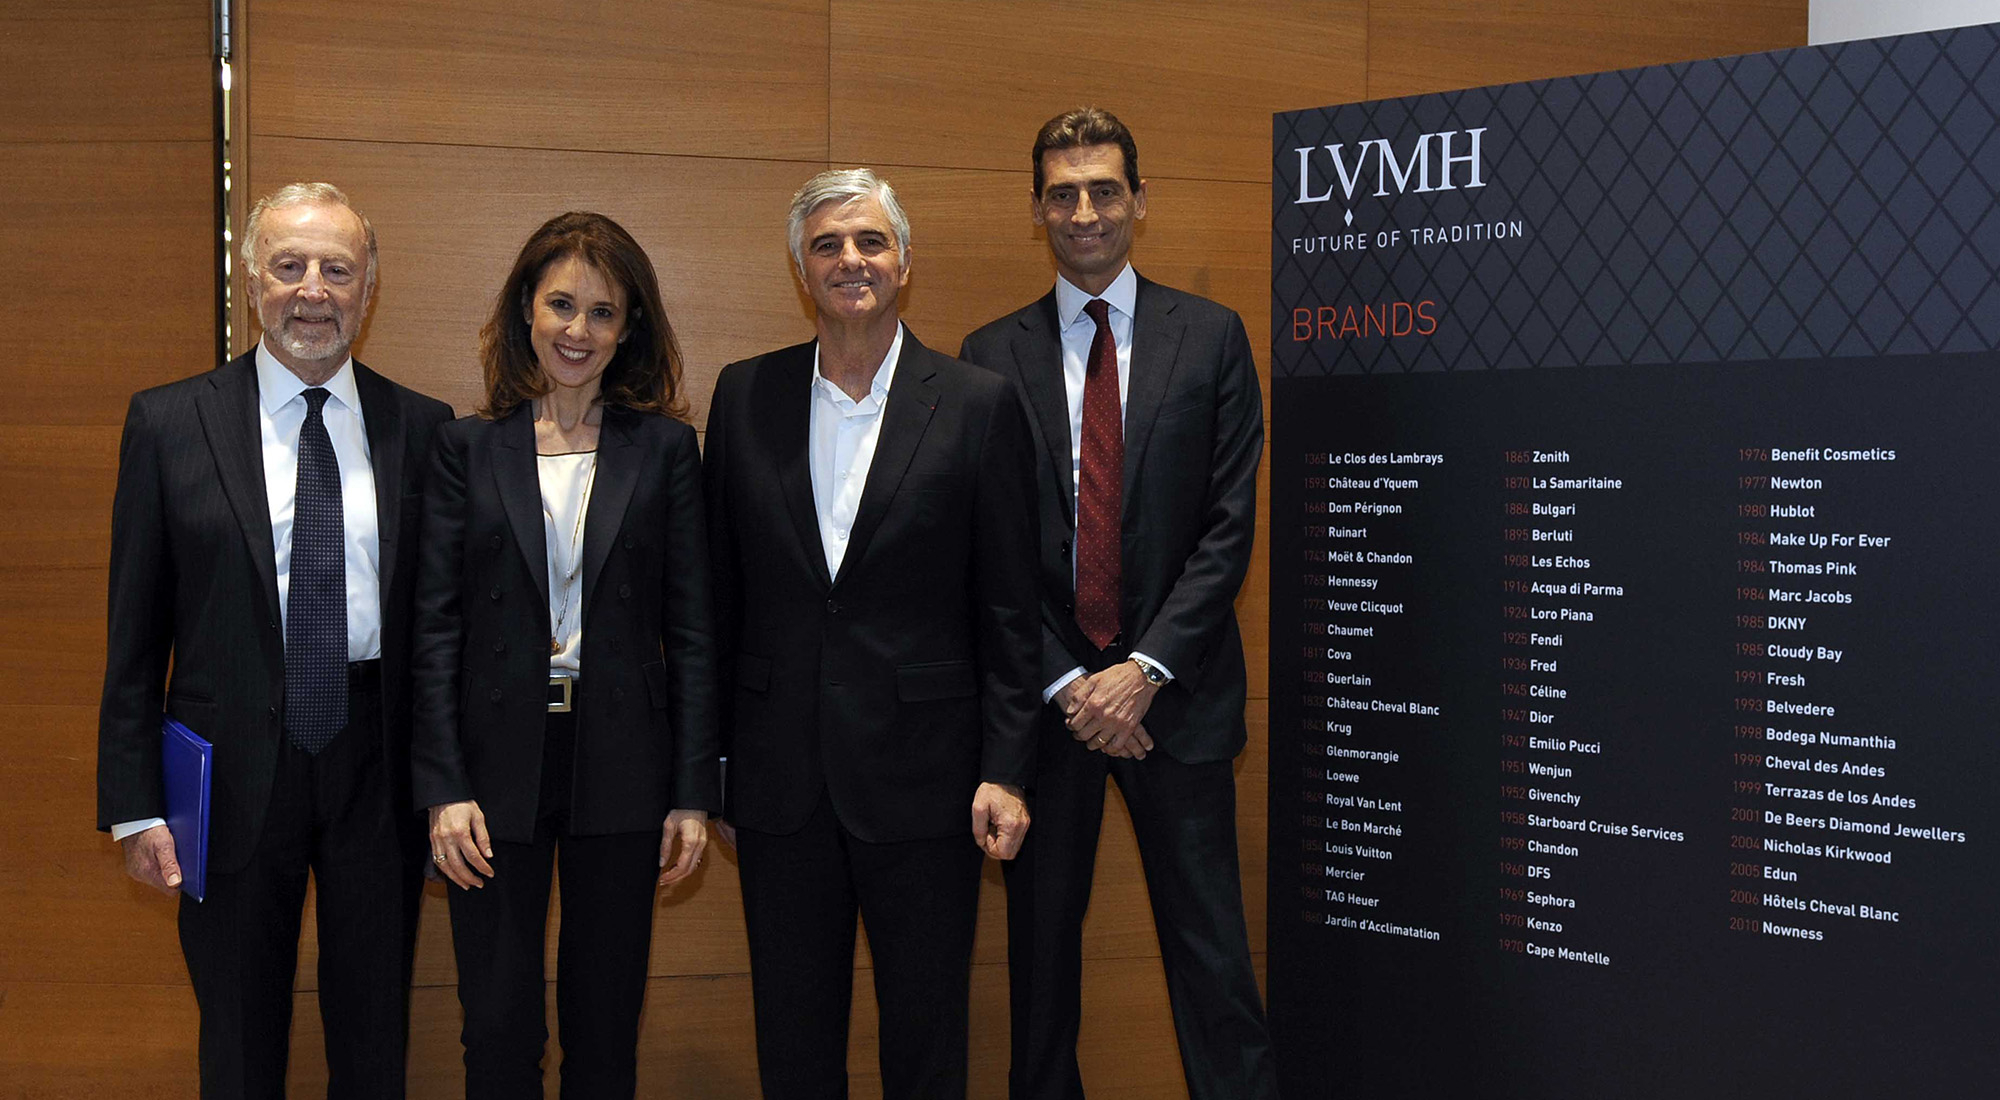 LVMH - Developed in partnership with EDHEC Business School